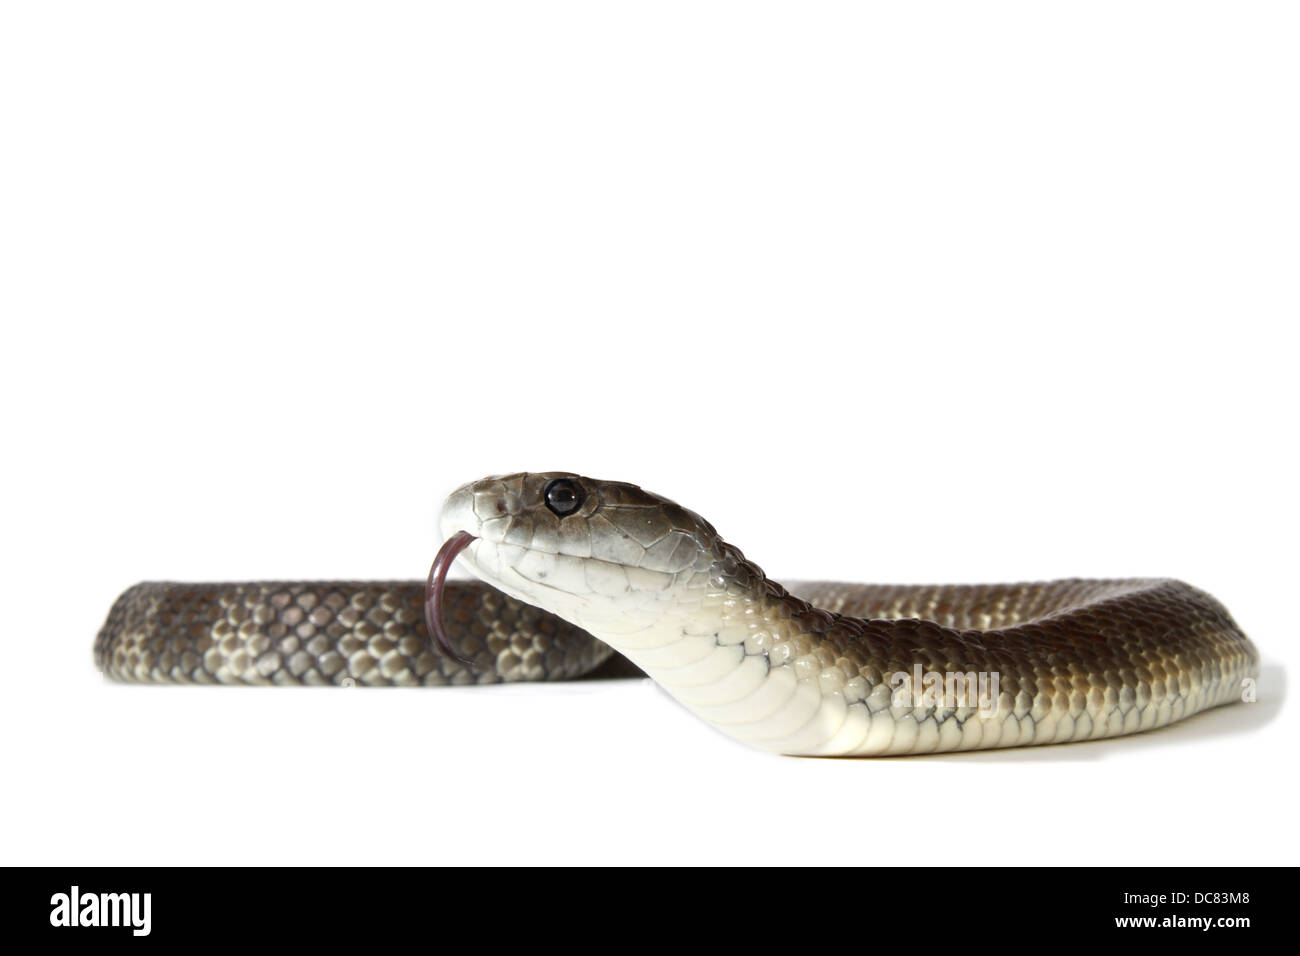 Tiger snake, notechis scutatus photographed on a white background, digitally adjusted ready for easy cut-out Stock Photo